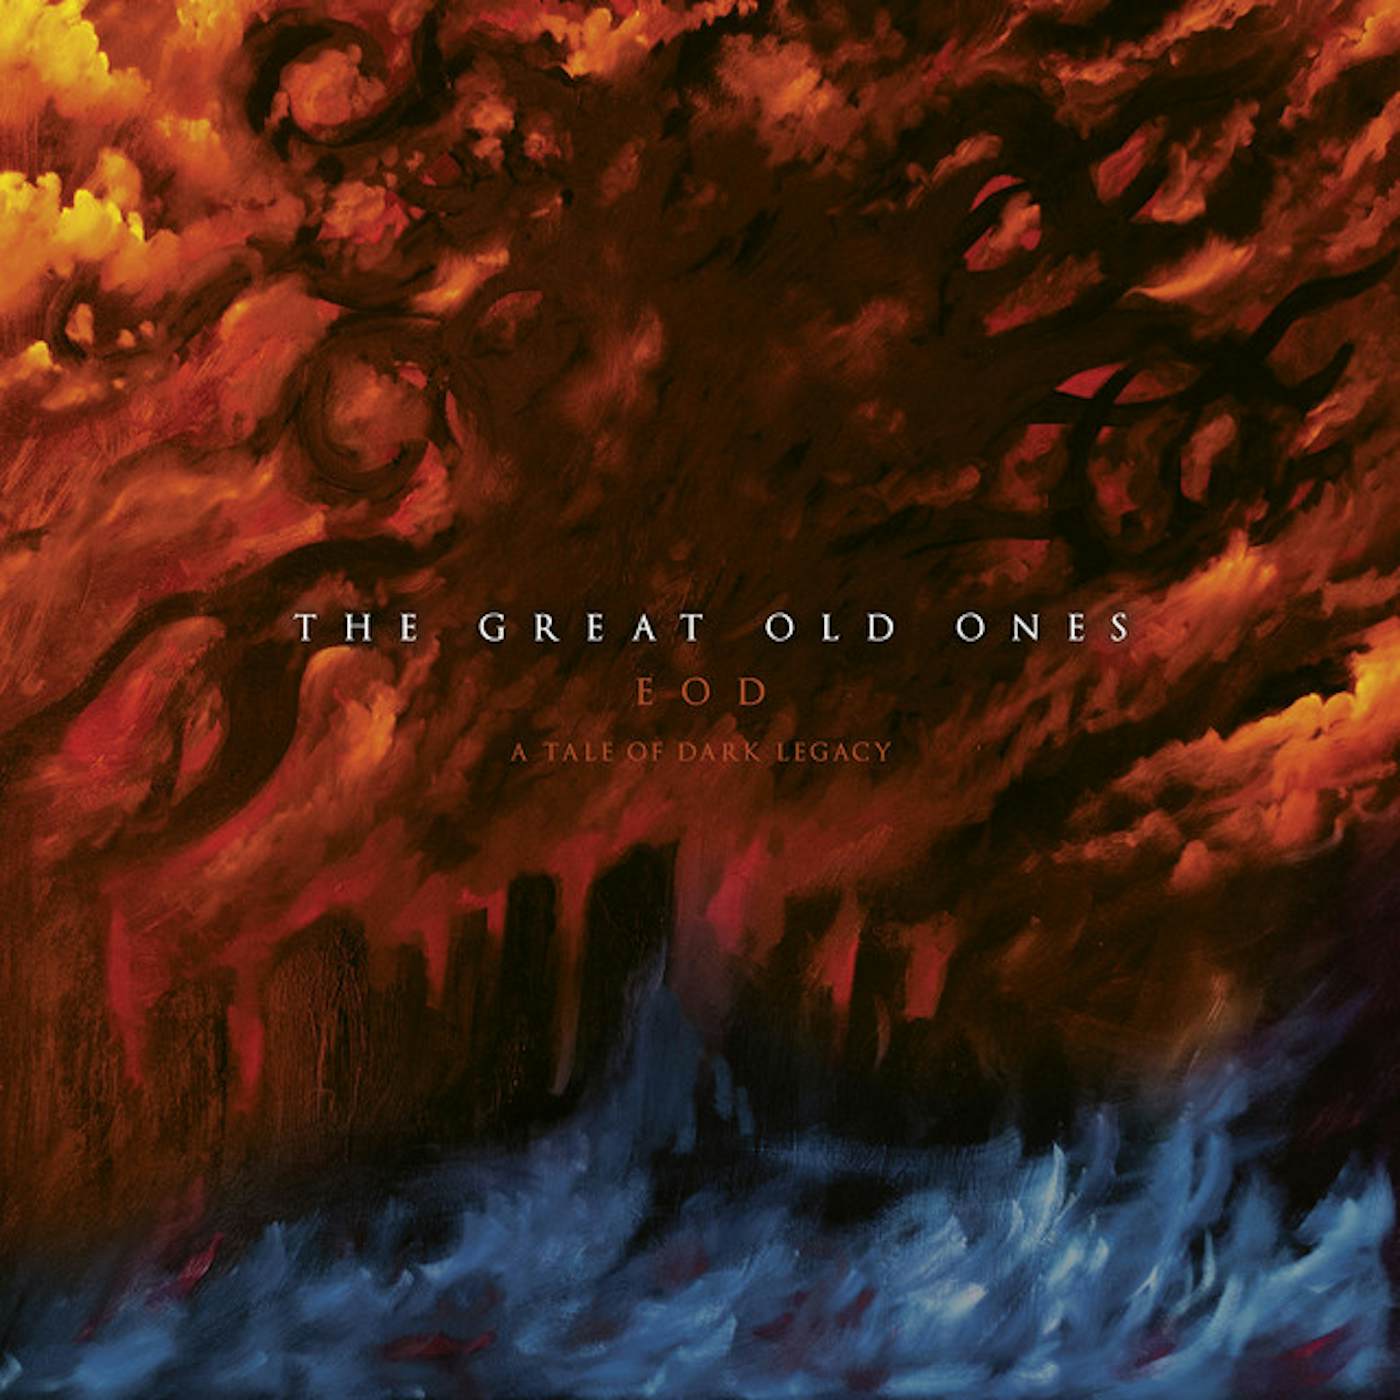 The Great Old Ones EOD: TALE OF DARK LEGACY Vinyl Record